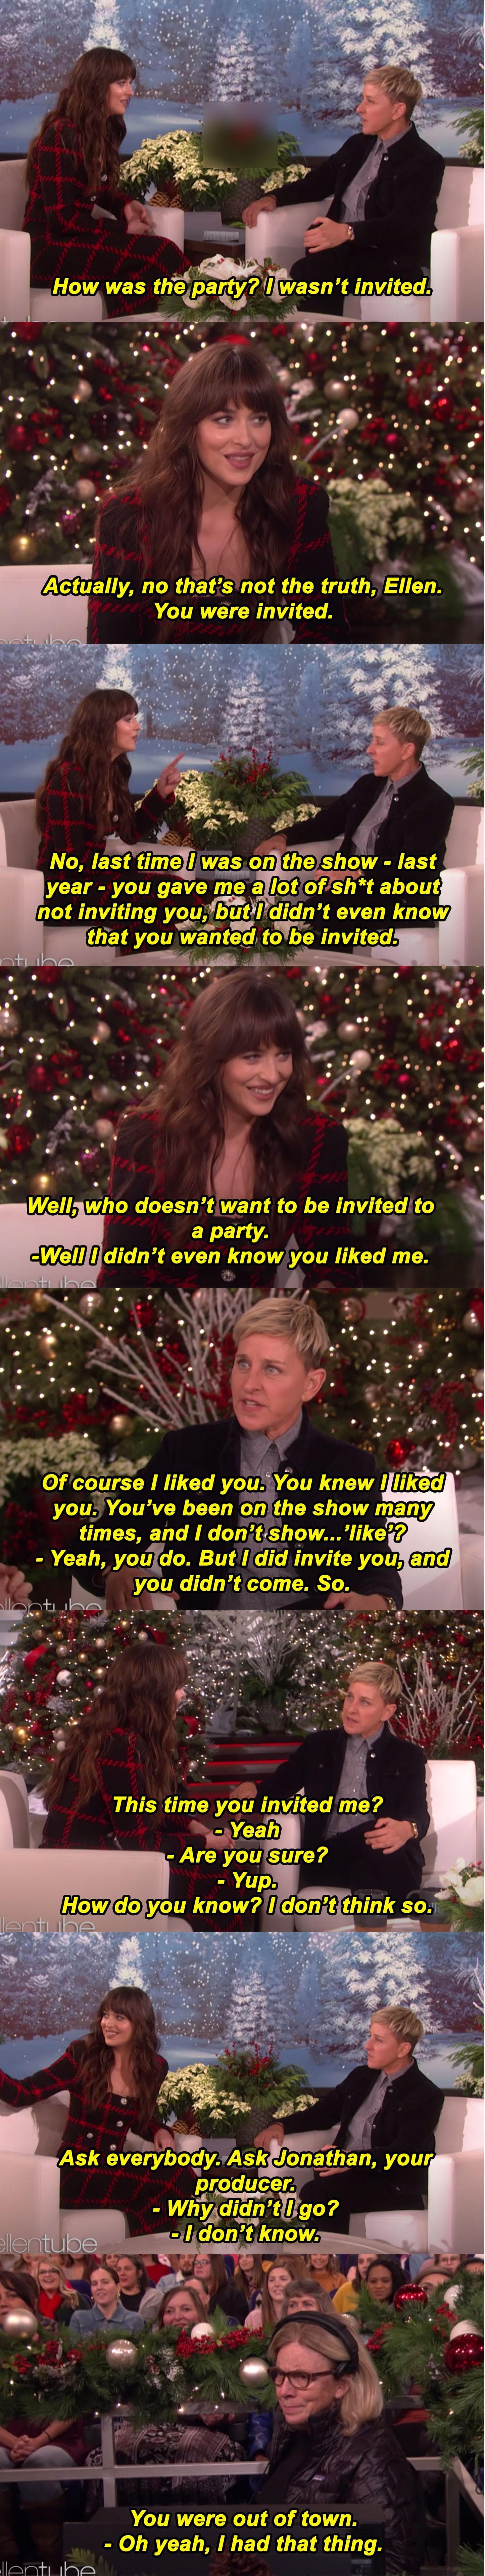 Random Uncomfortable Times Ellen Made A Joke At The Expense Of Her Guests